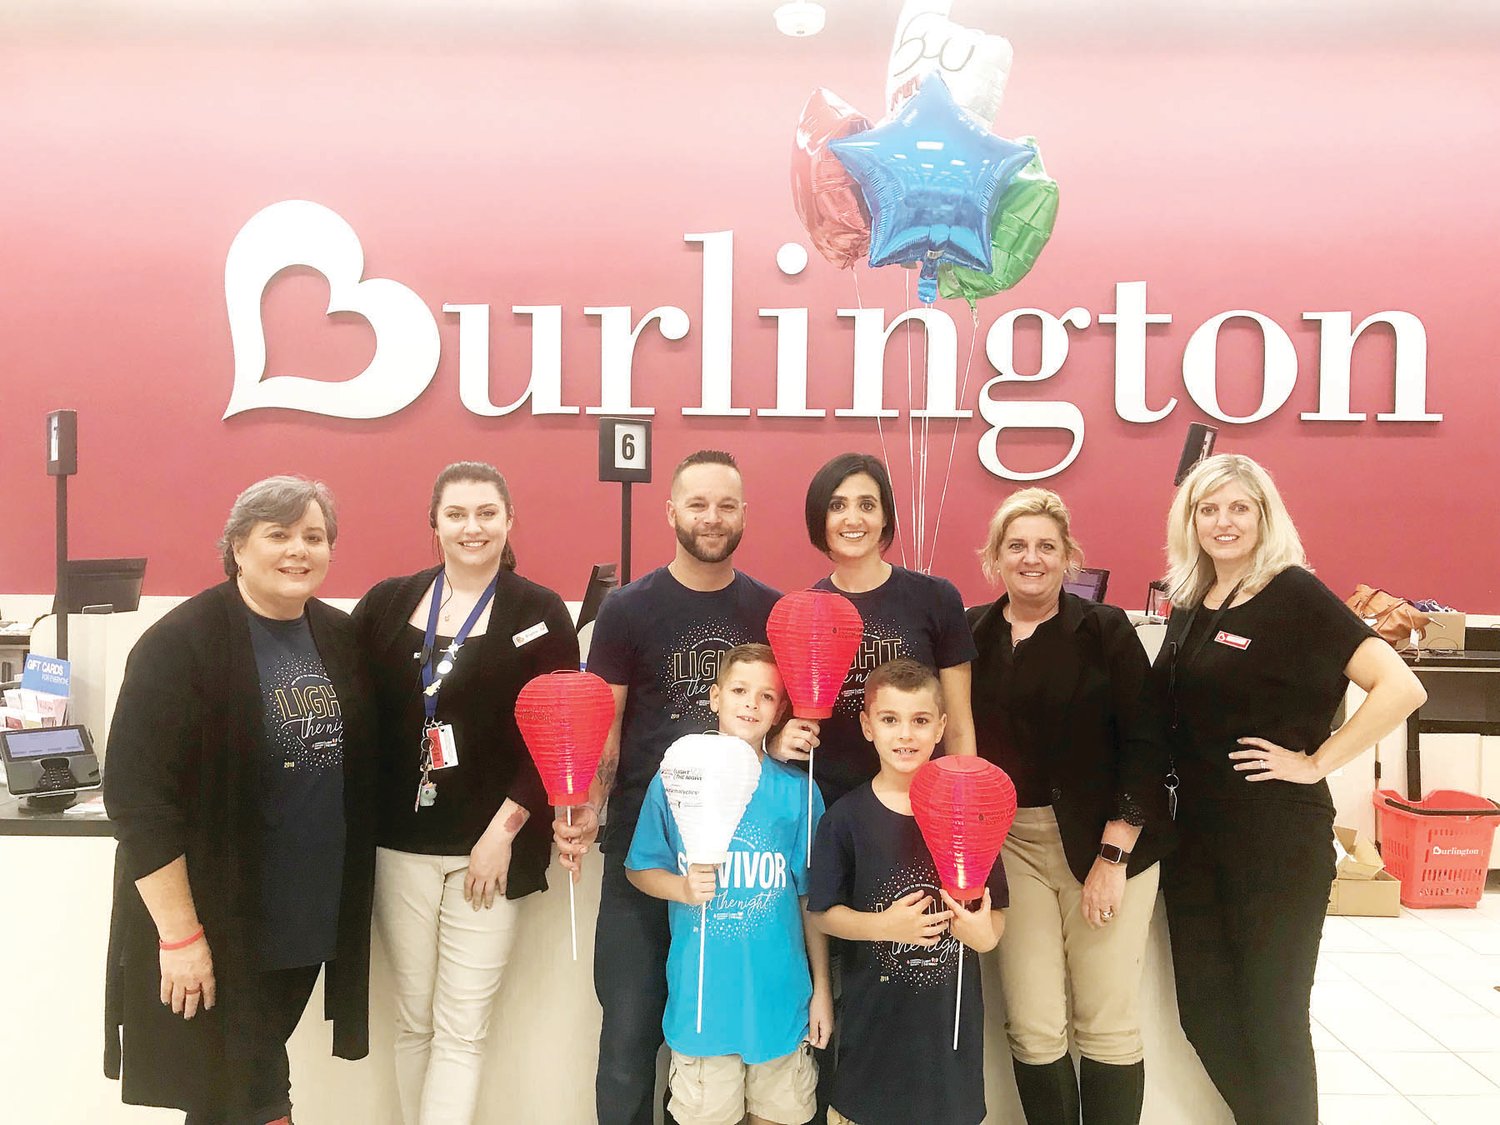 Garrett Adams, 8, a student at J.M Grasse Elementary School in Sellersville, went on a $100 shopping spree Oct. 11 courtesy of the Leukemia & Lymphoma Society and Burlington Stores in Hatfield. Garrett, seen wearing a survivor T-shirt, was diagnosed with leukemia after his second birthday and has been in remission for two years.